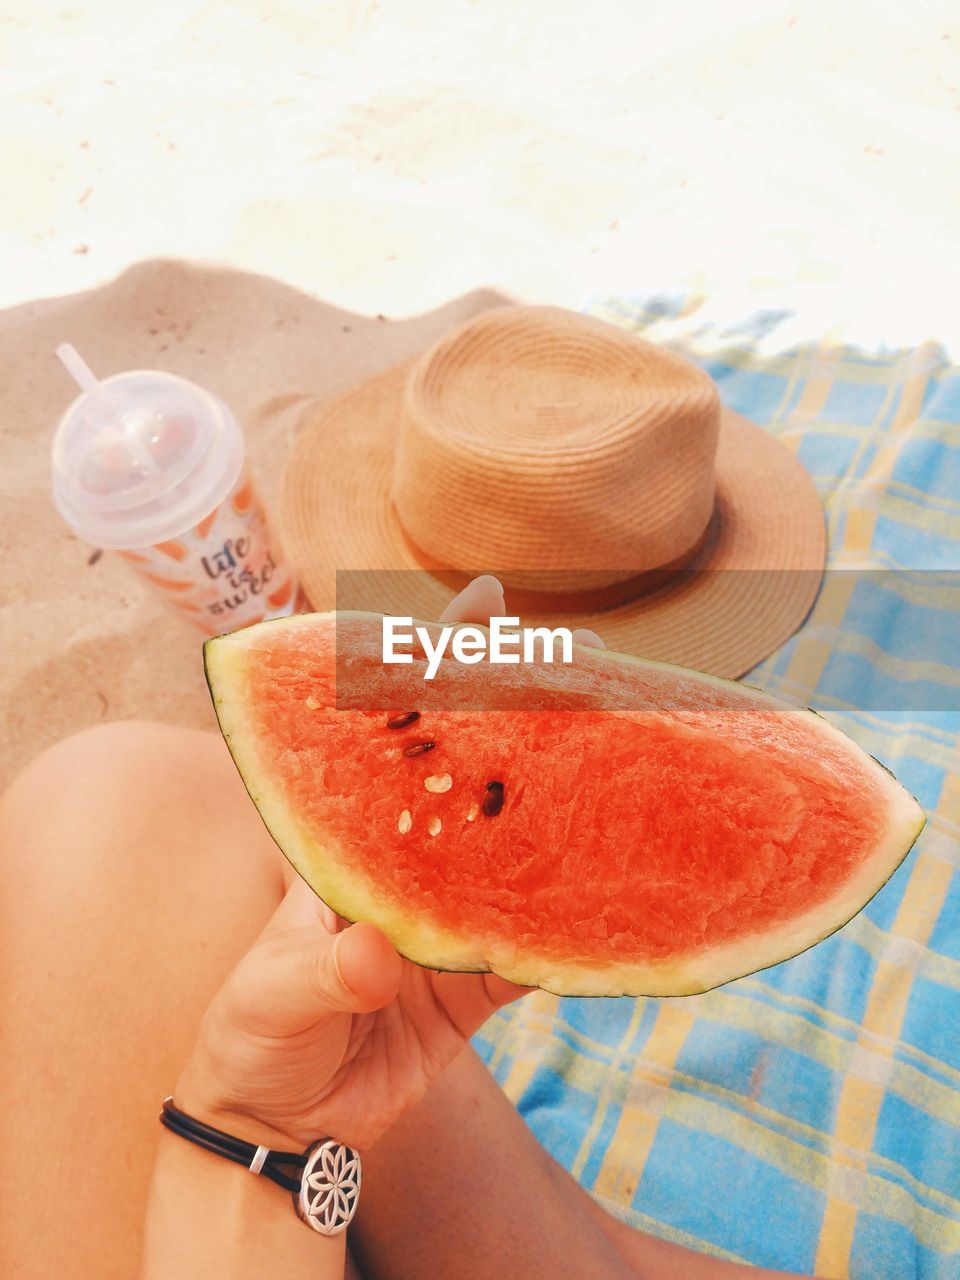 Cropped image of woman holding watermelon